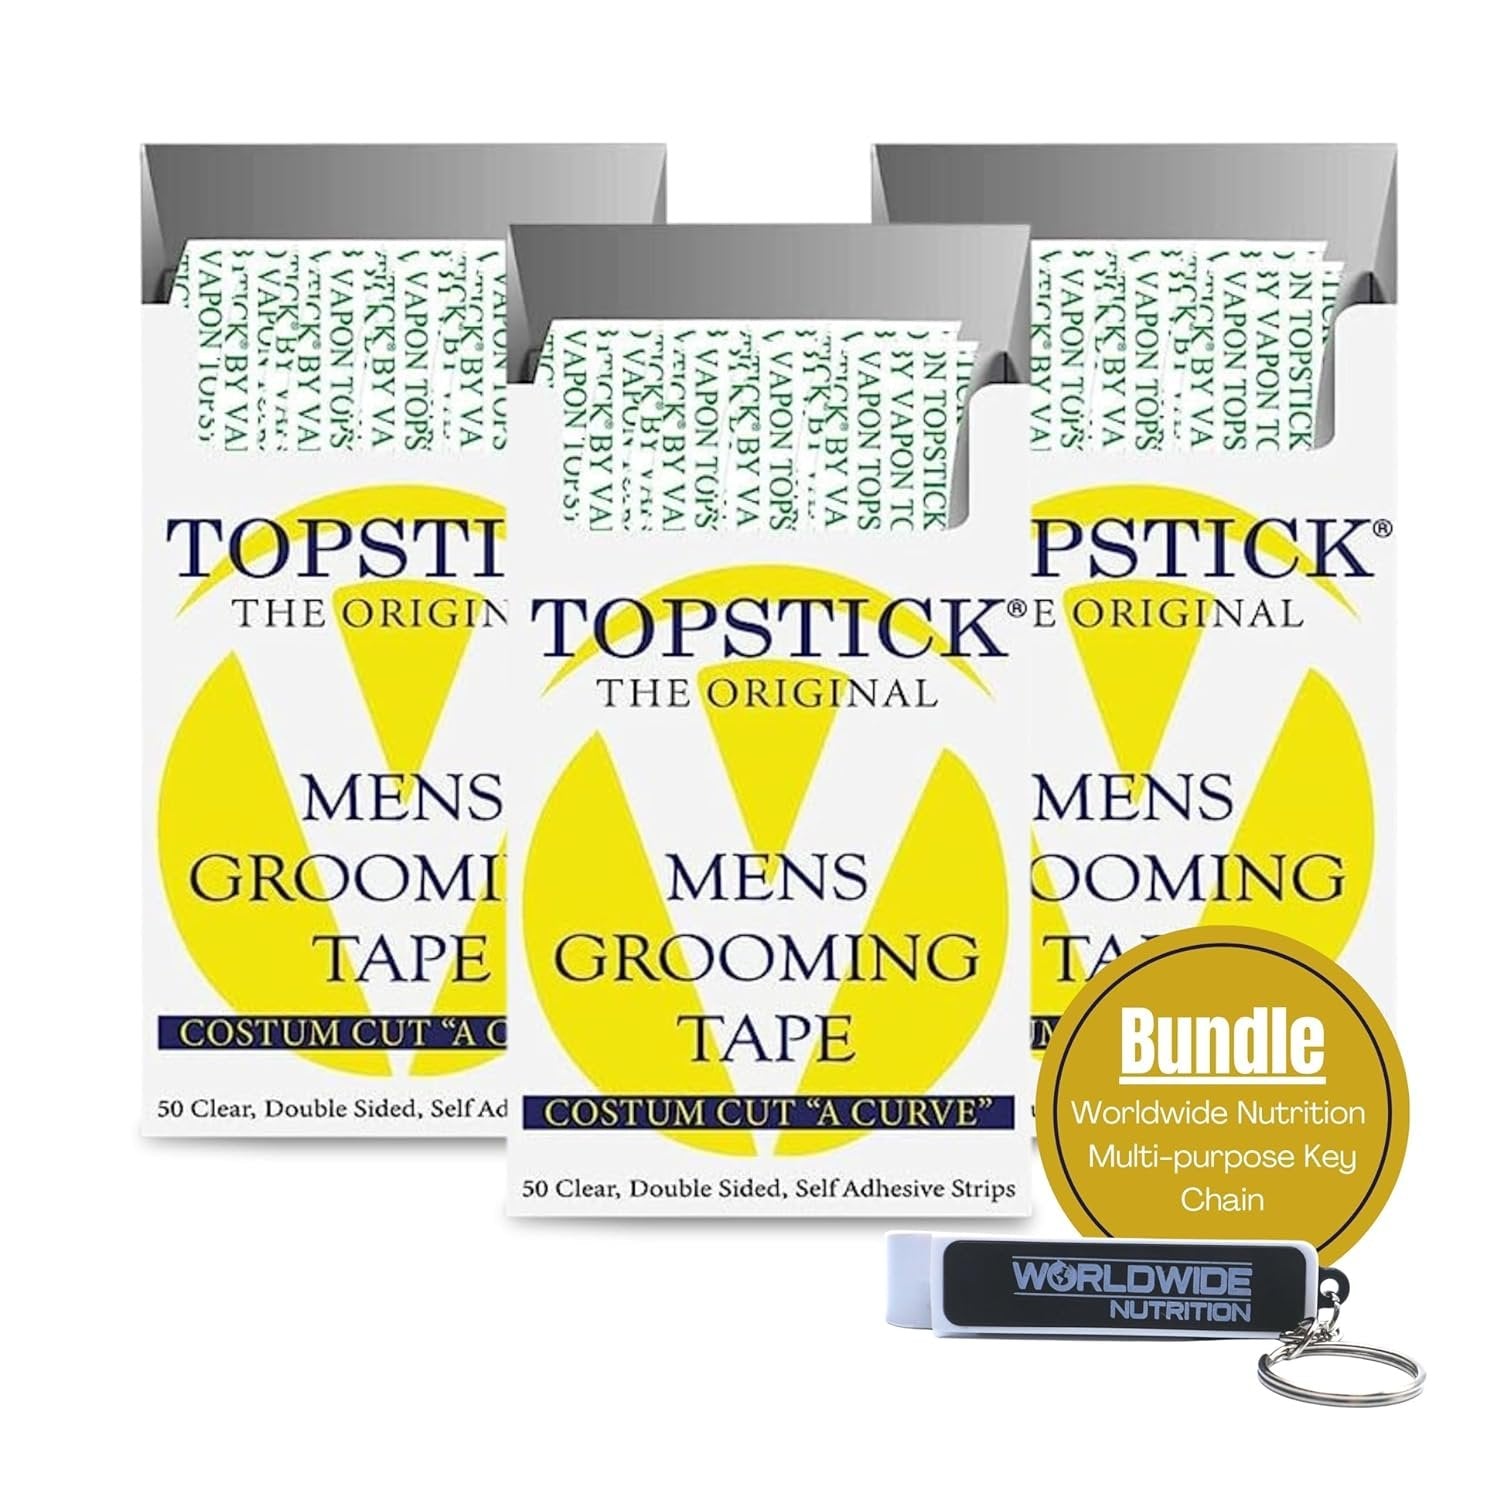 TopStick Tape Strips & Vapon Toupee Tapes at Wig Warehouse